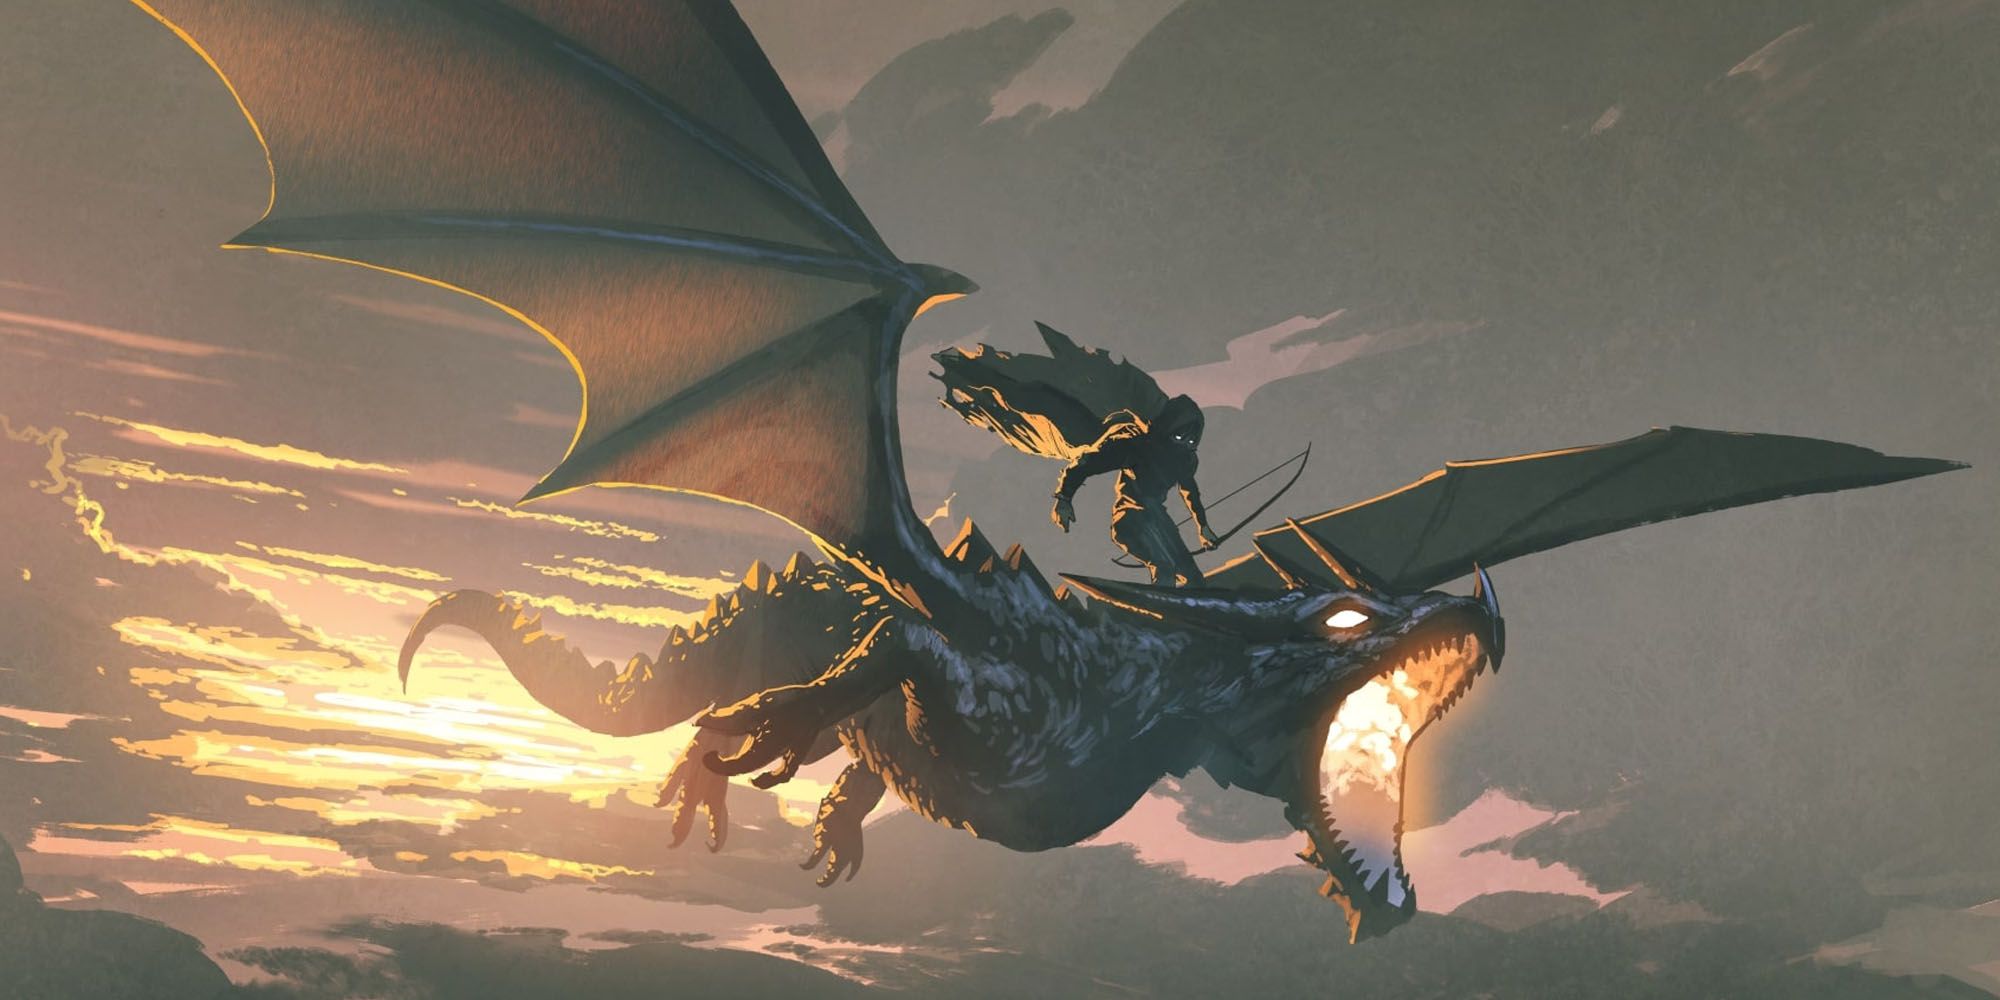 A humanoid figure riding on a dragon's back